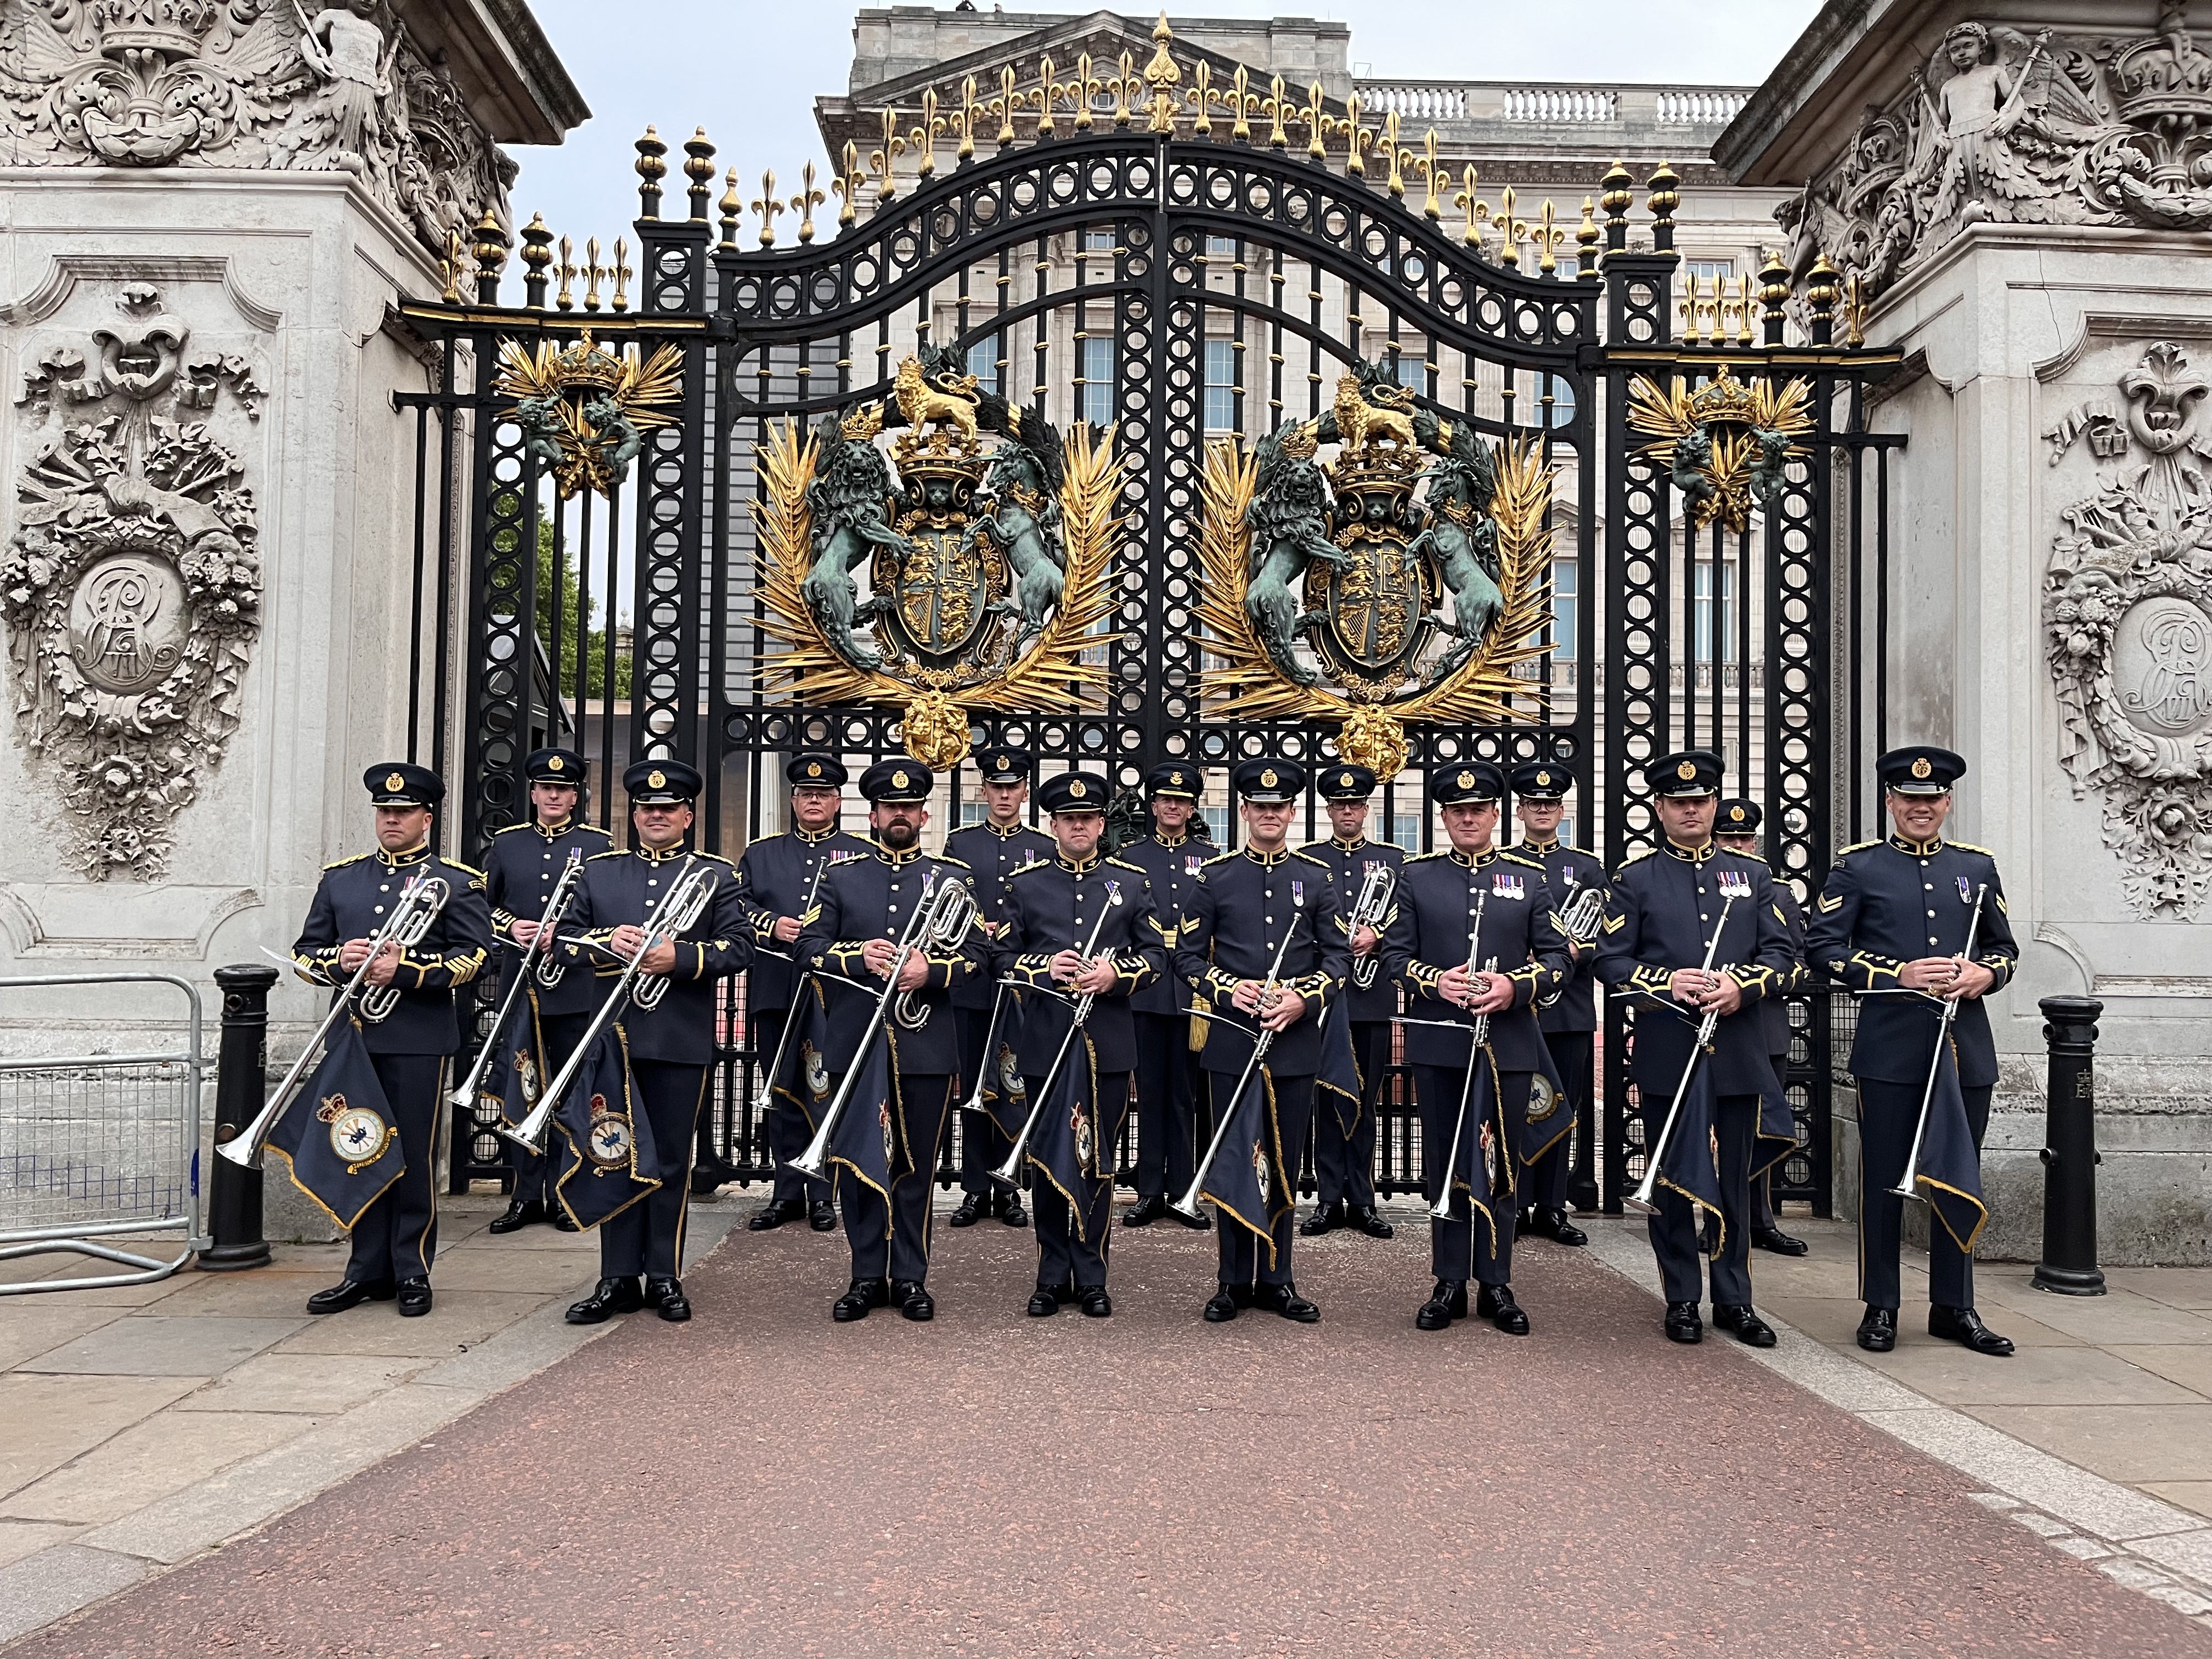 The Fanfare Trumpeters of the Royal Air Force